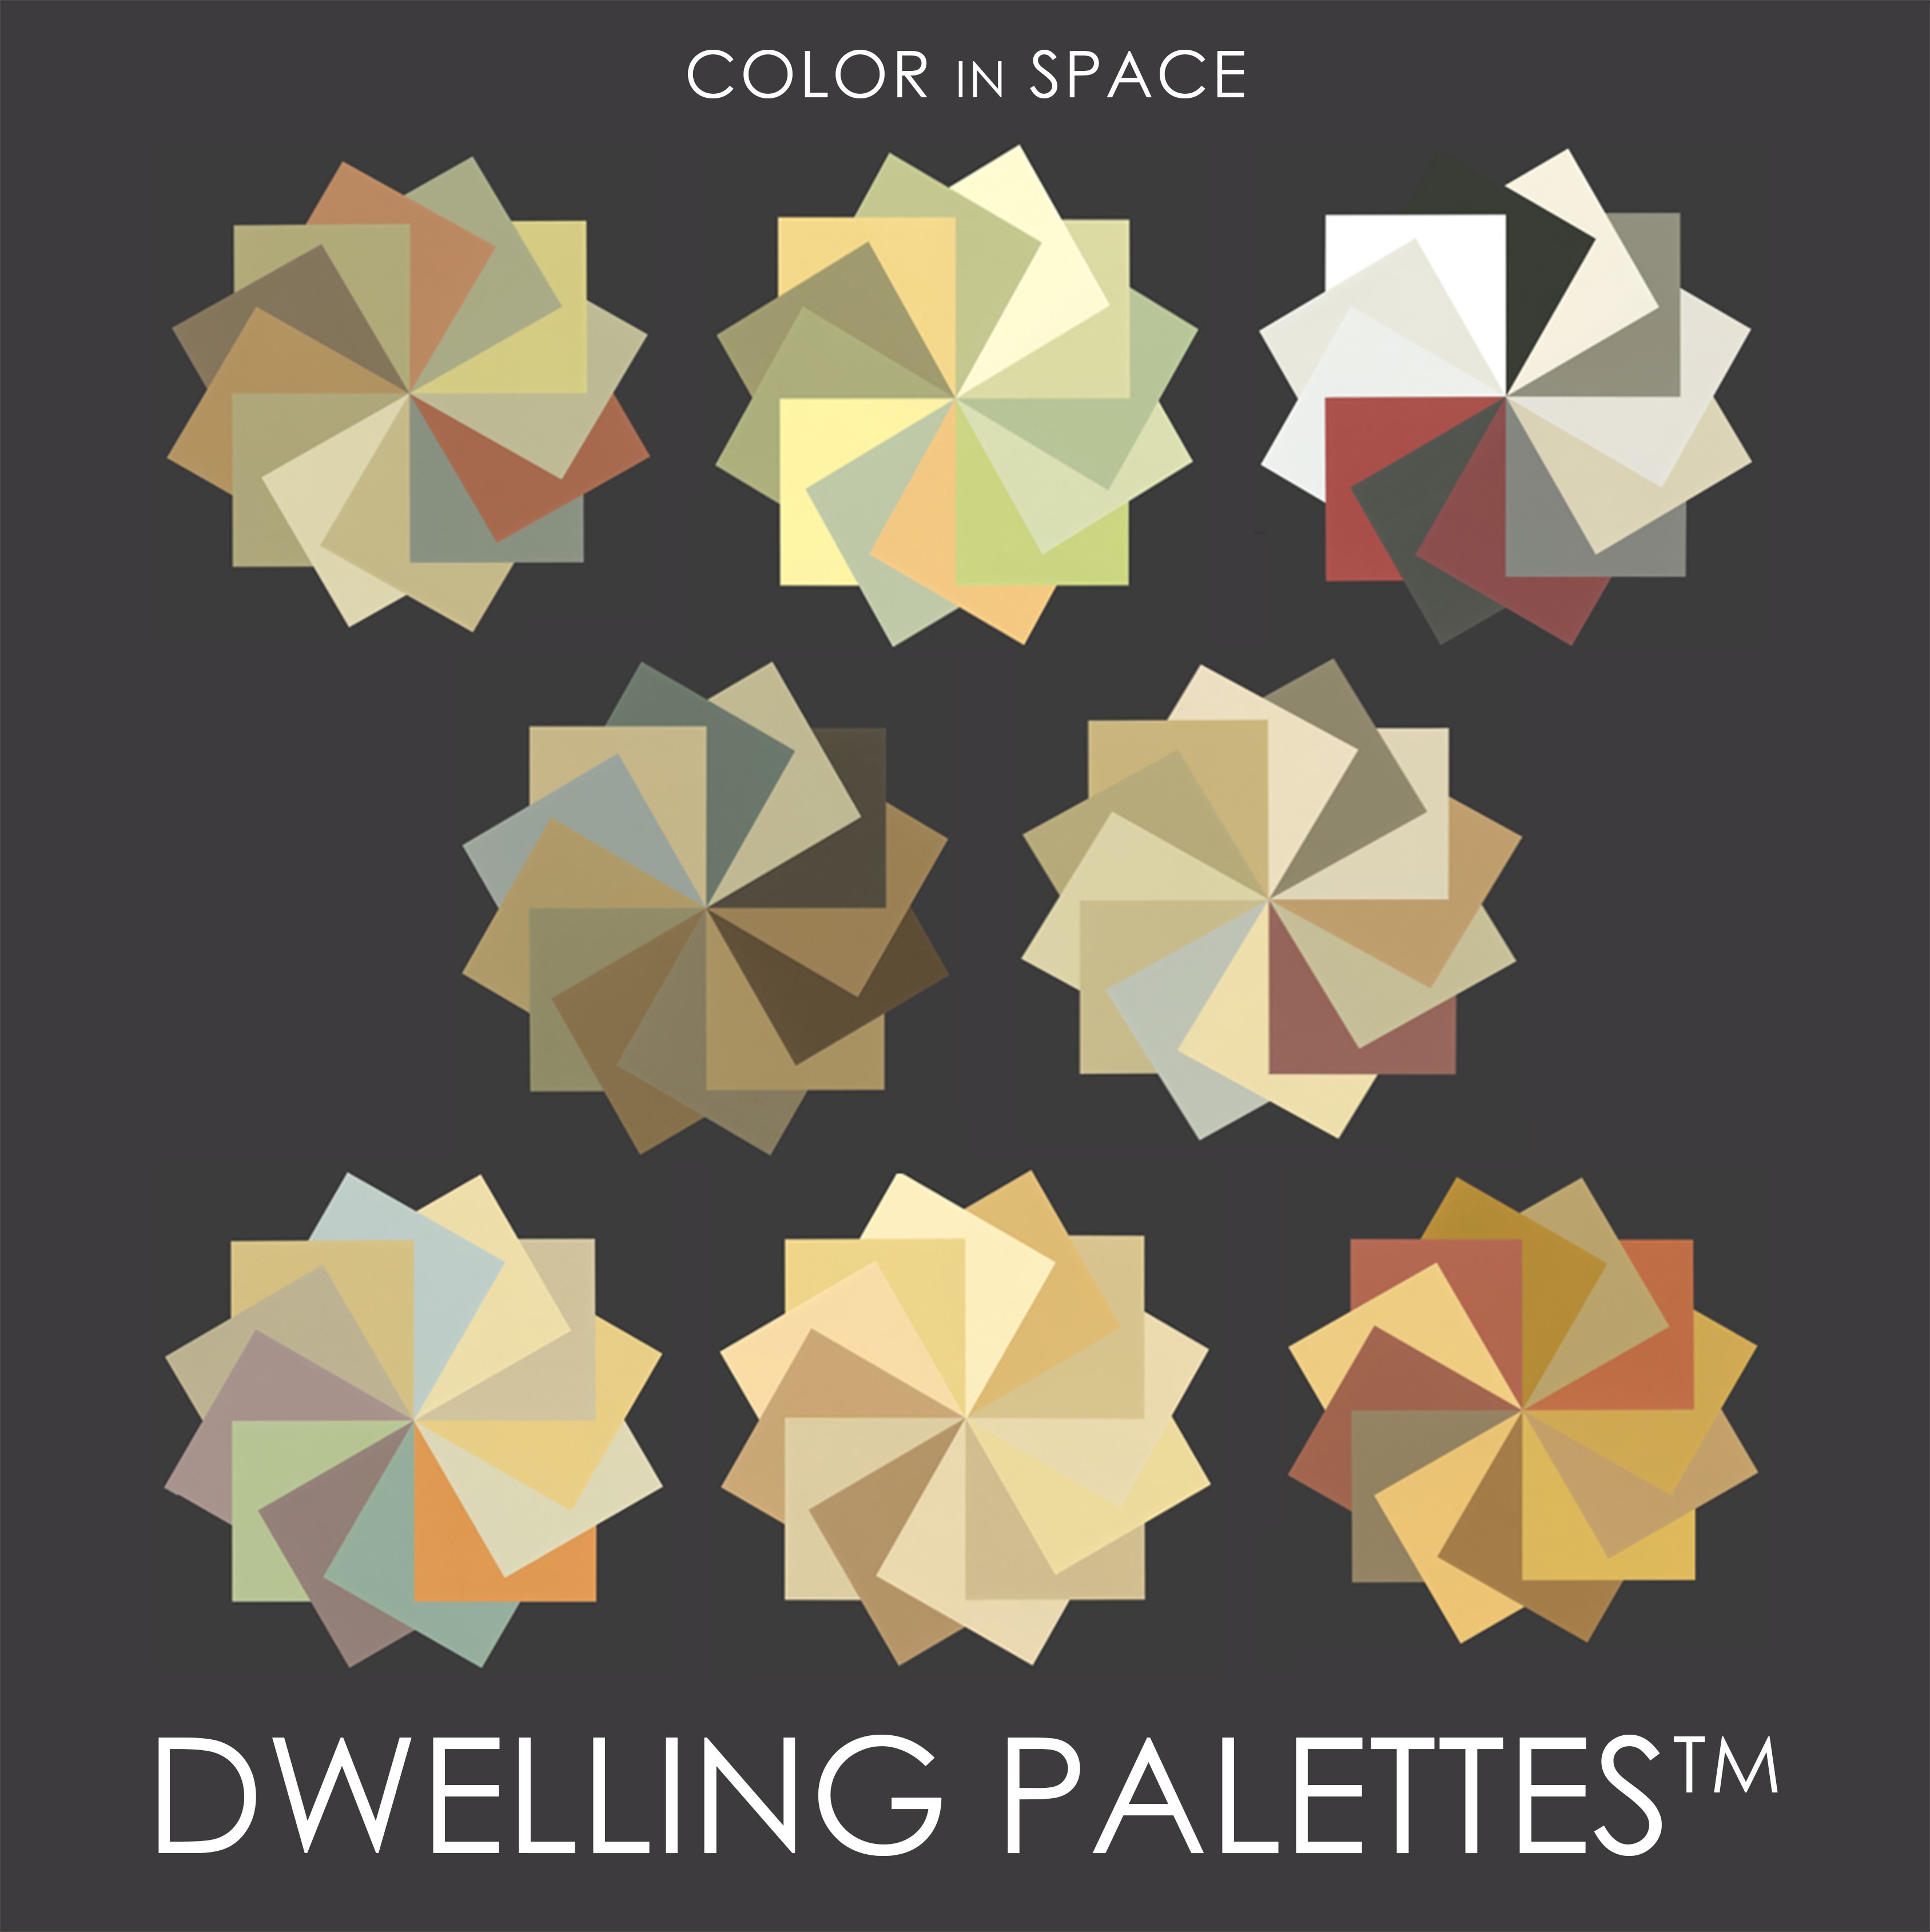 Dwelling Palettes by Color in Space